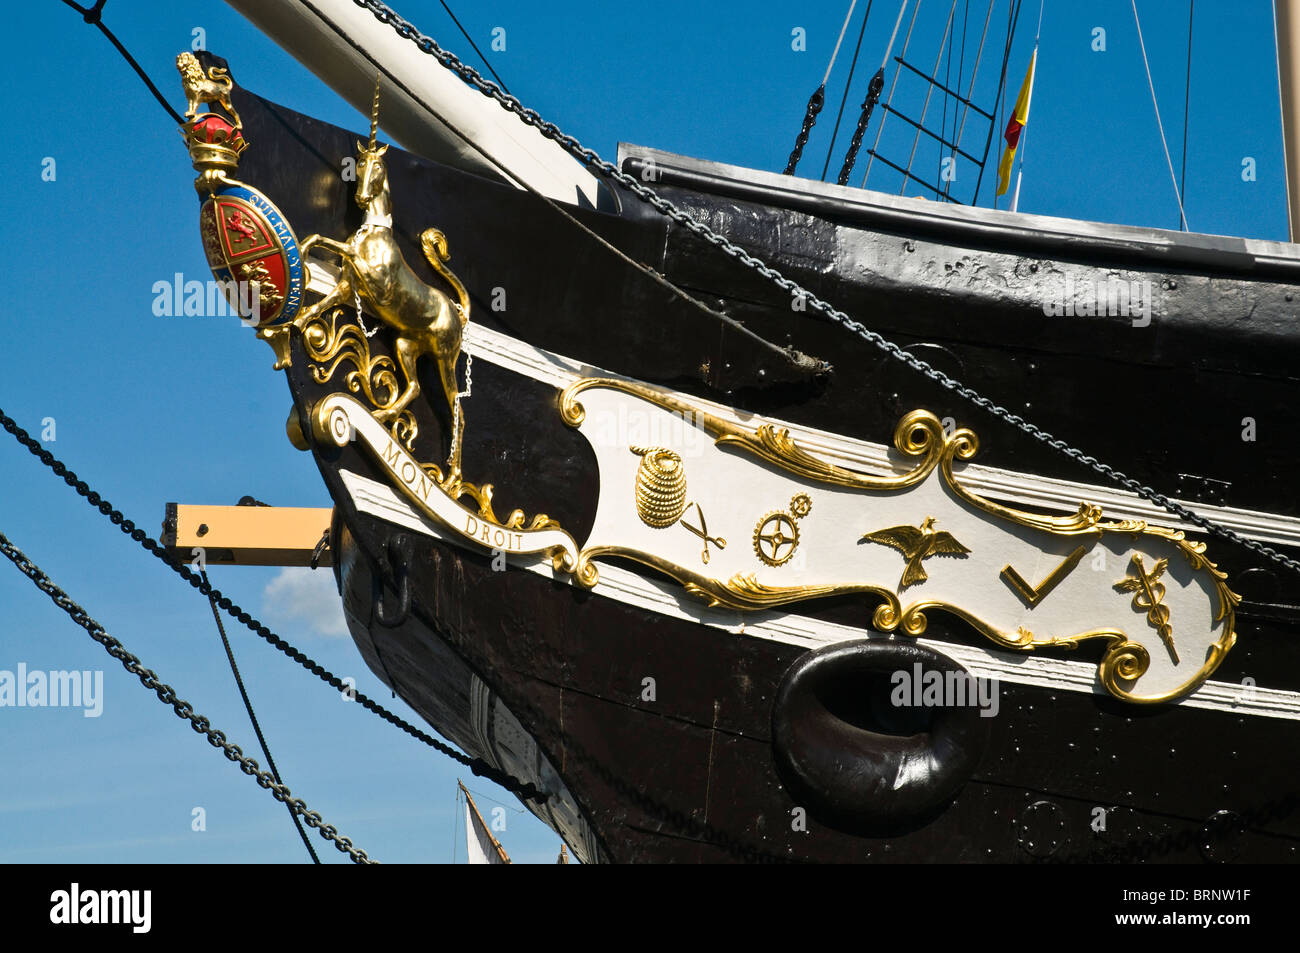 dh SS Great Britain BRISTOL DOCKS BRISTOL Ships prow bow of ship maritme ship museum front close up Stock Photo